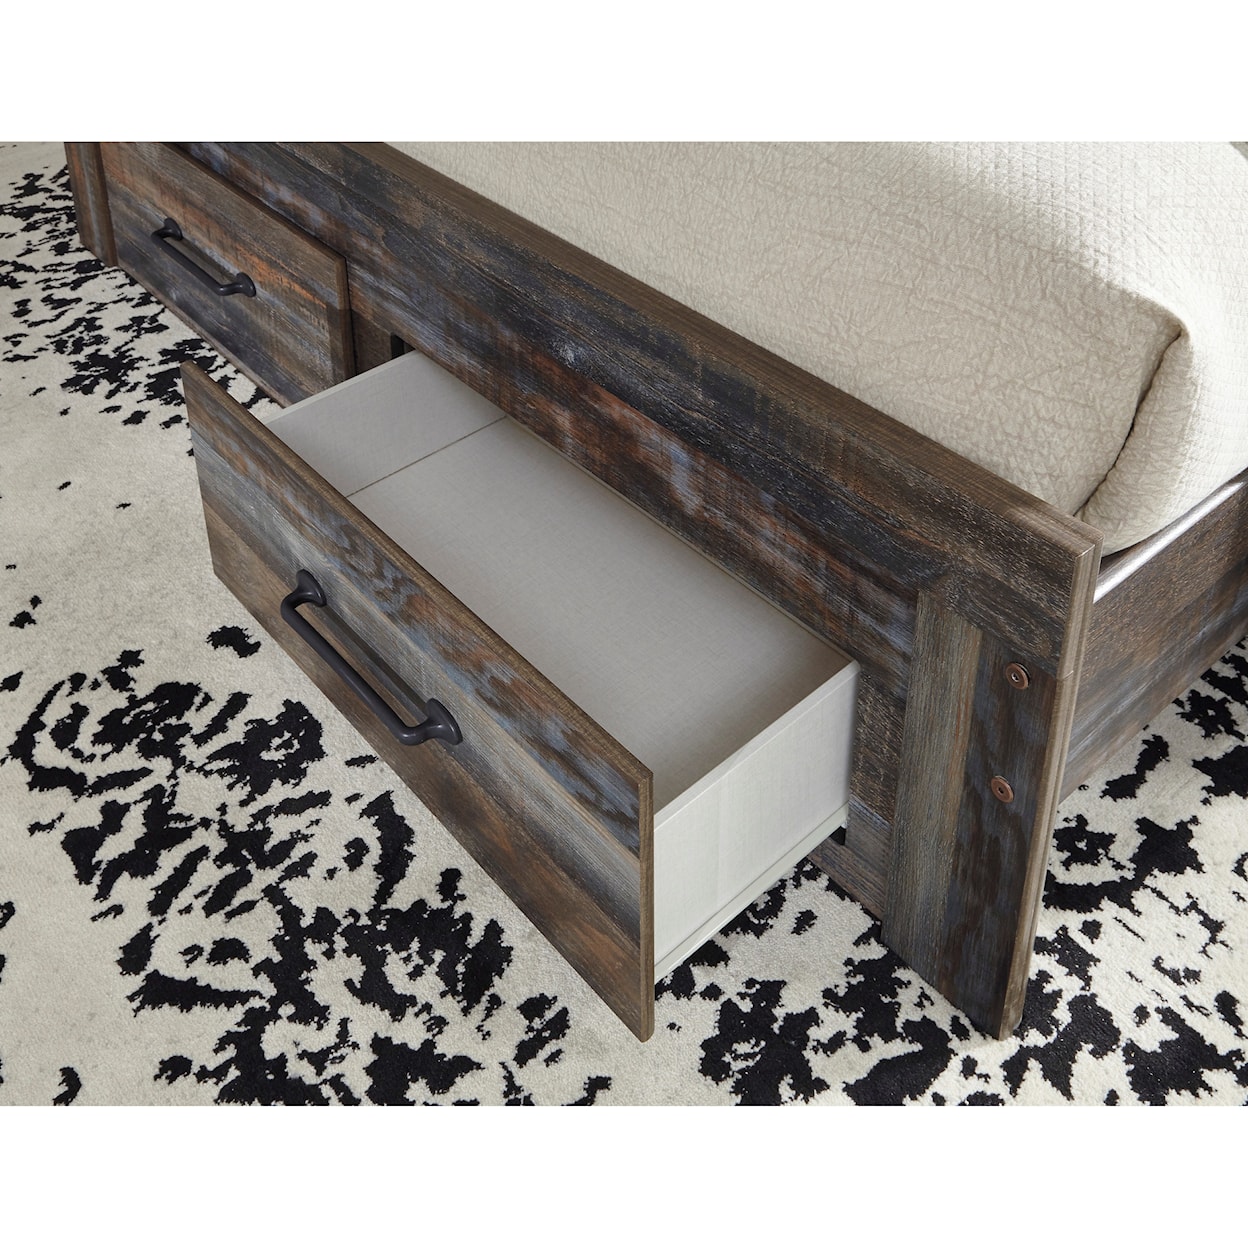 Signature Design Drystan Queen Bookcase Bed with Footboard Drawers